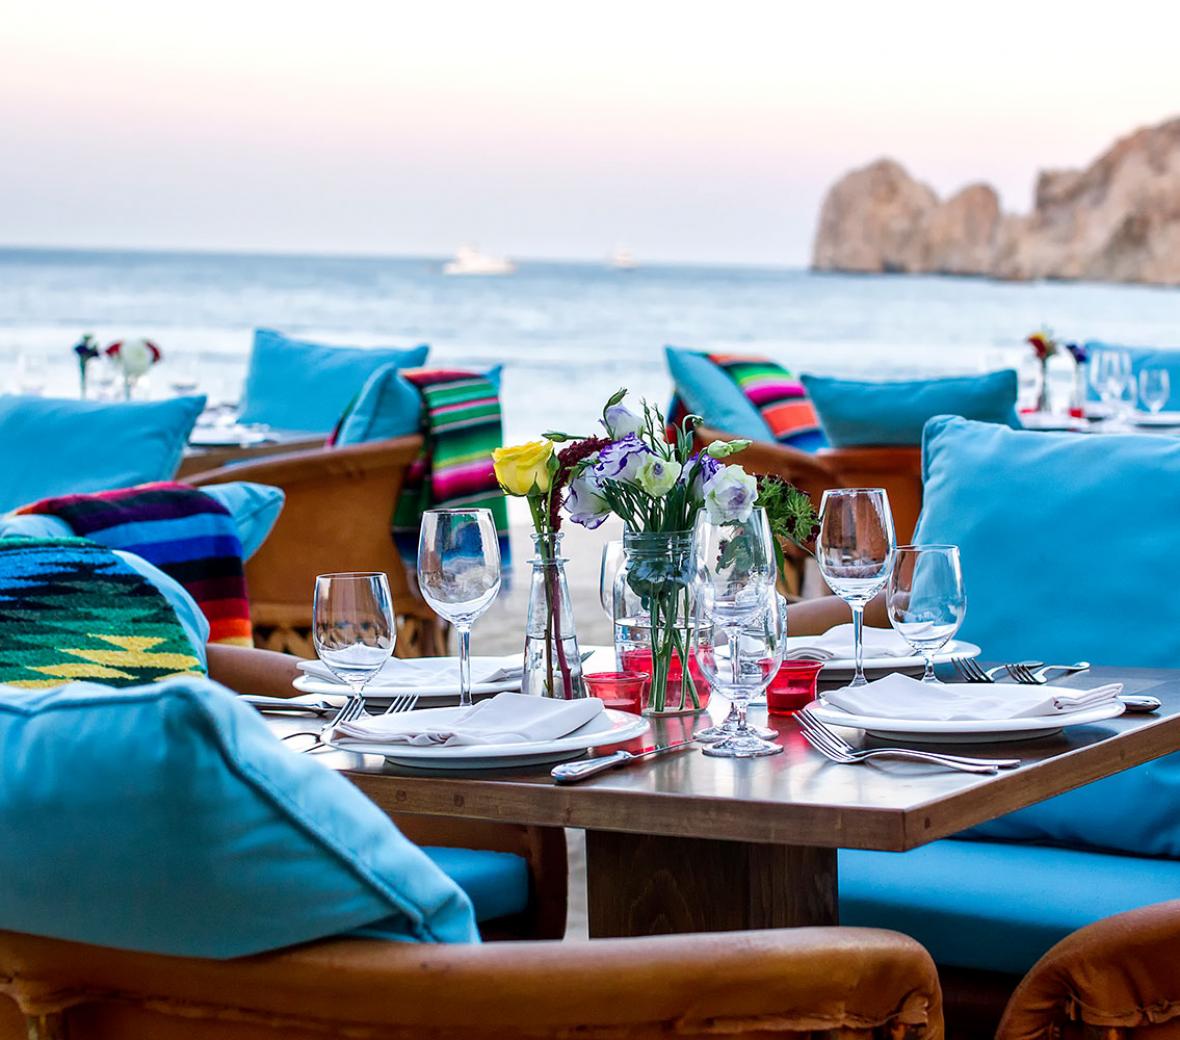 Chairs and tables set for dinner by the ocean